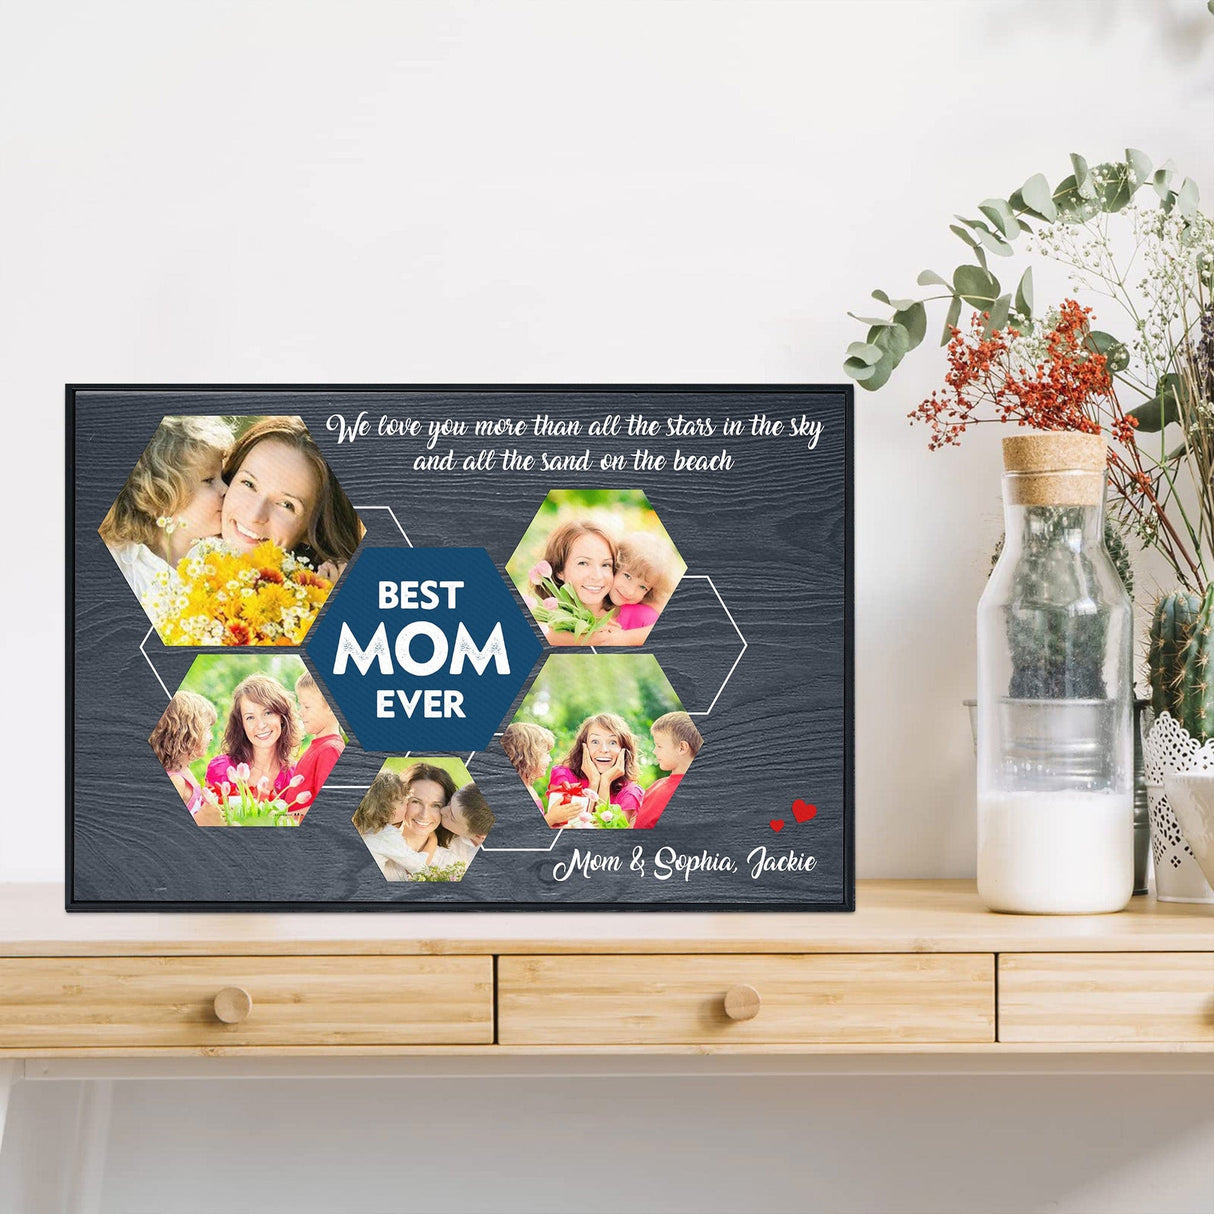 Posters, Prints, & Visual Artwork Personalized Mother's Day Best MOM Ever - Custom Photo & Name Poster Canvas Print